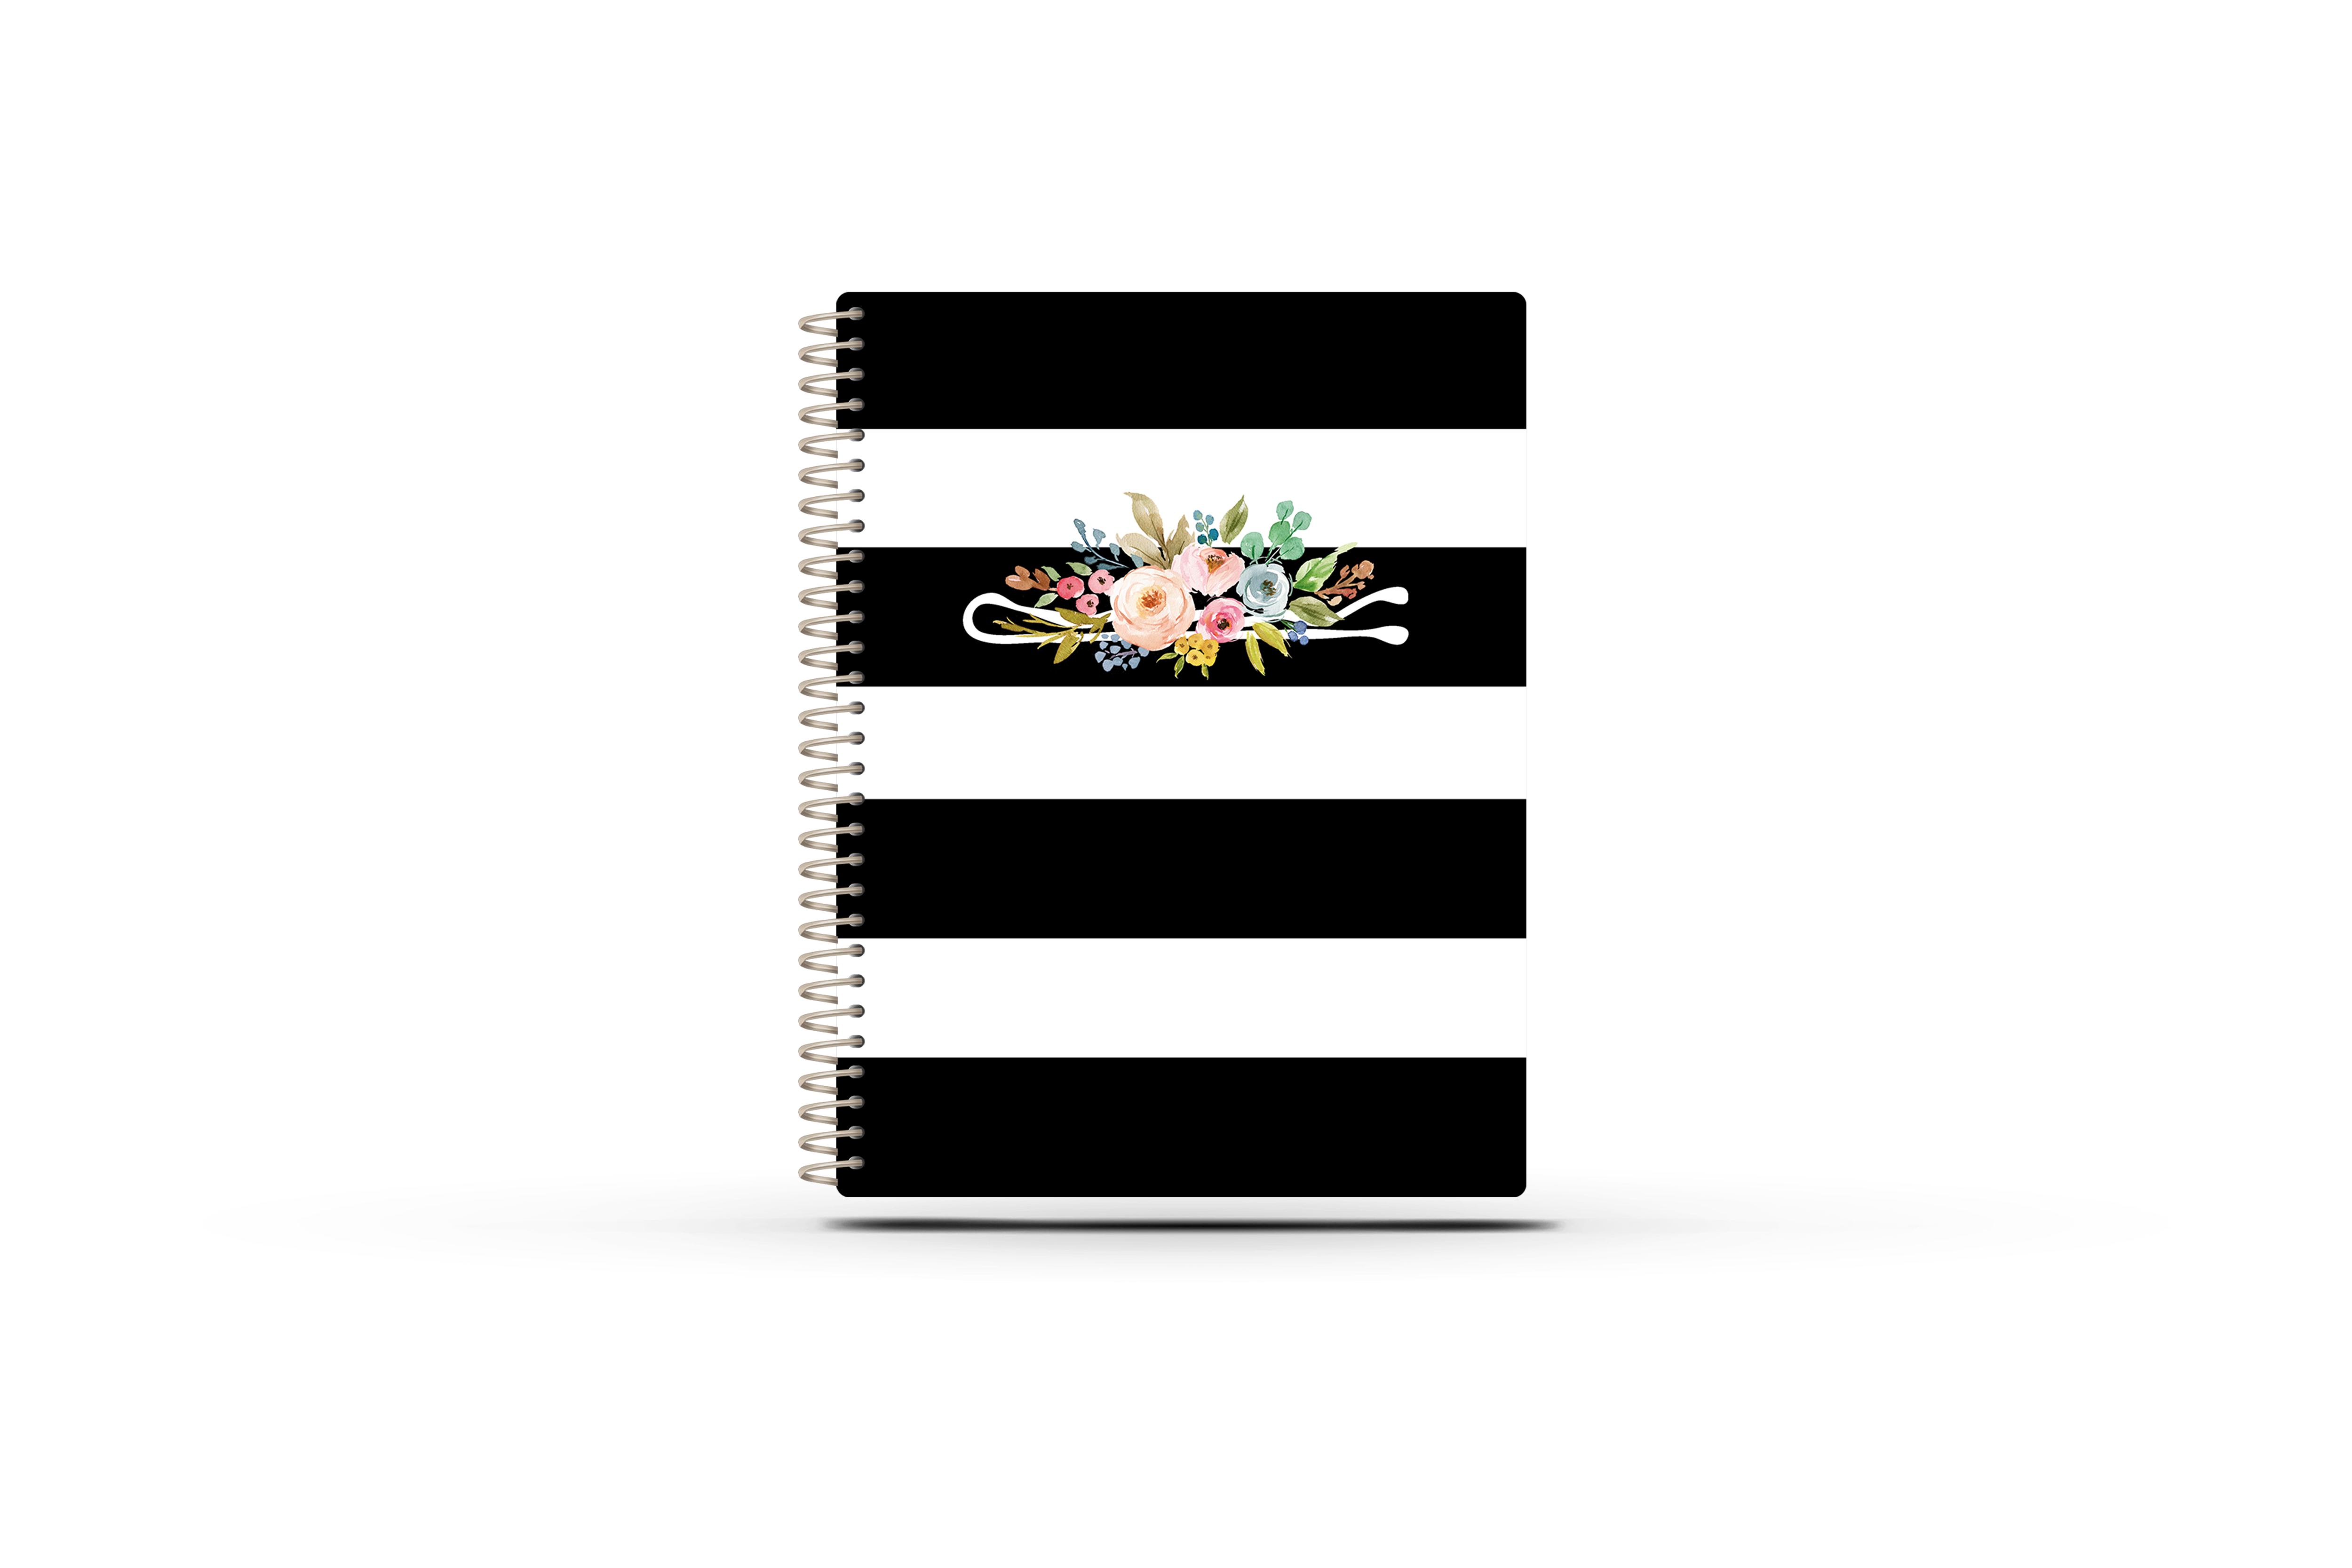 Lindsay VS Appointment Book - BW STRIPPED FLORAL